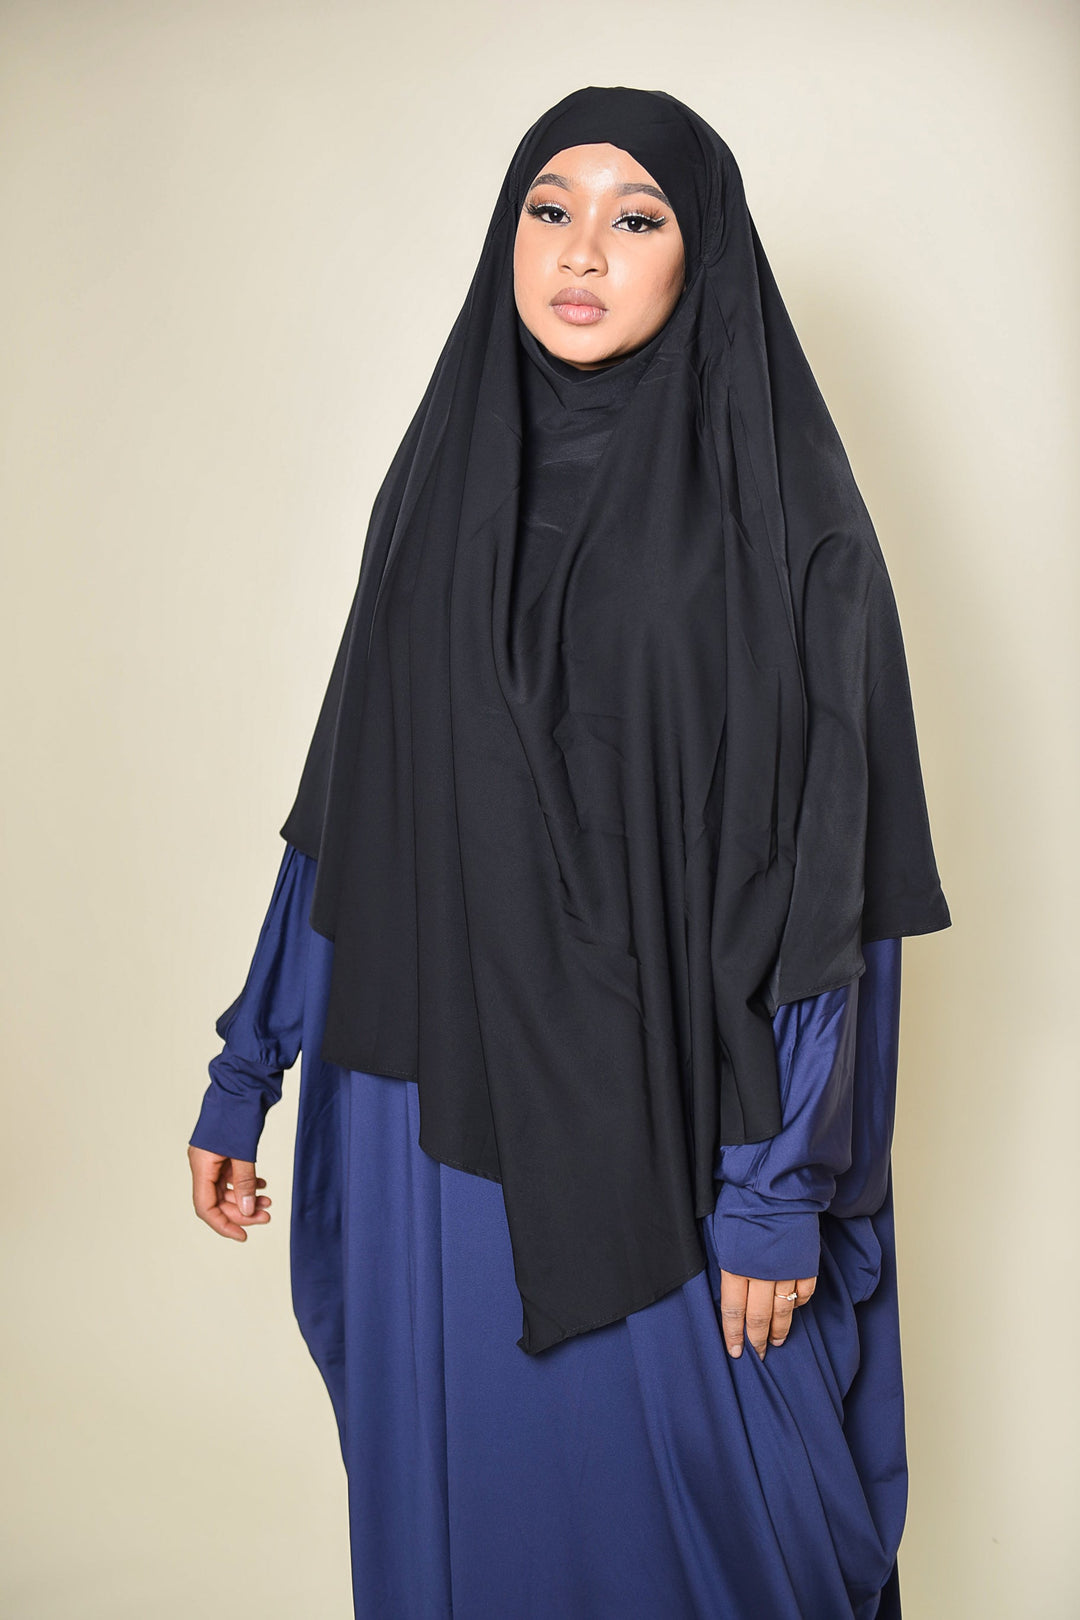 Get trendy with Diamond Khimar Black - Hijab available at Voilee NY. Grab yours for $34.99 today!